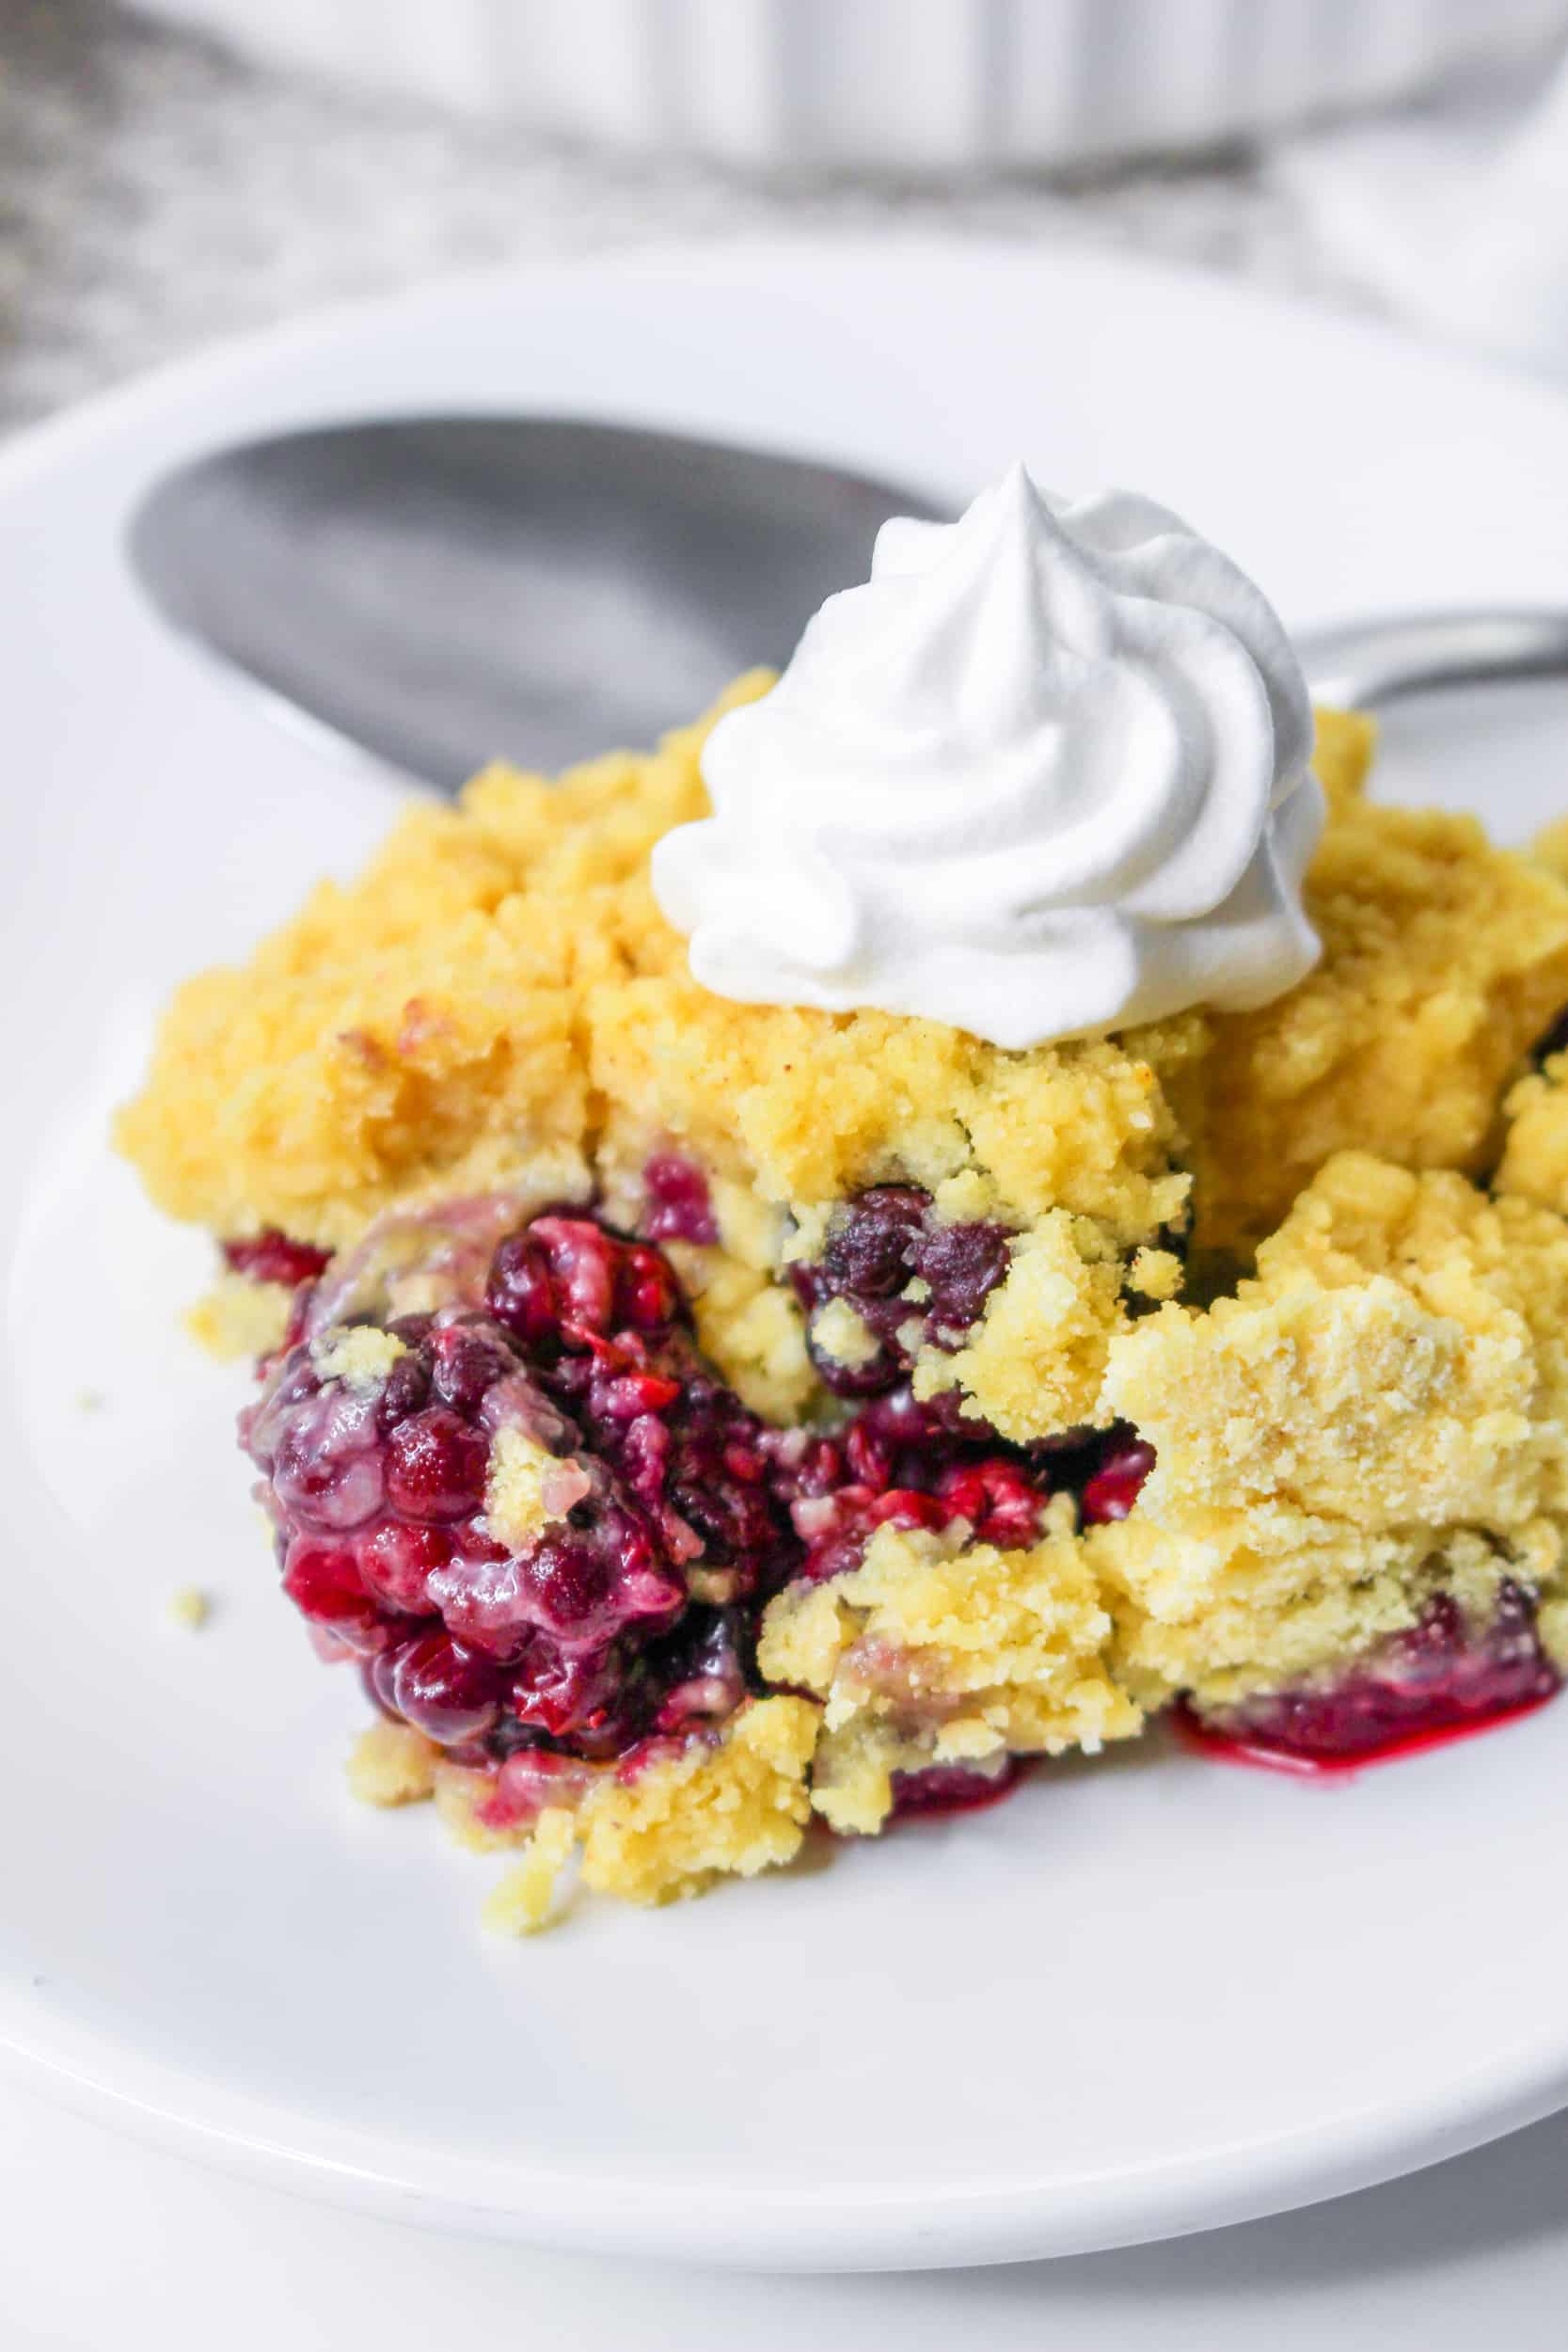 off center image of a instant pot blackberry cobbler on a white plate